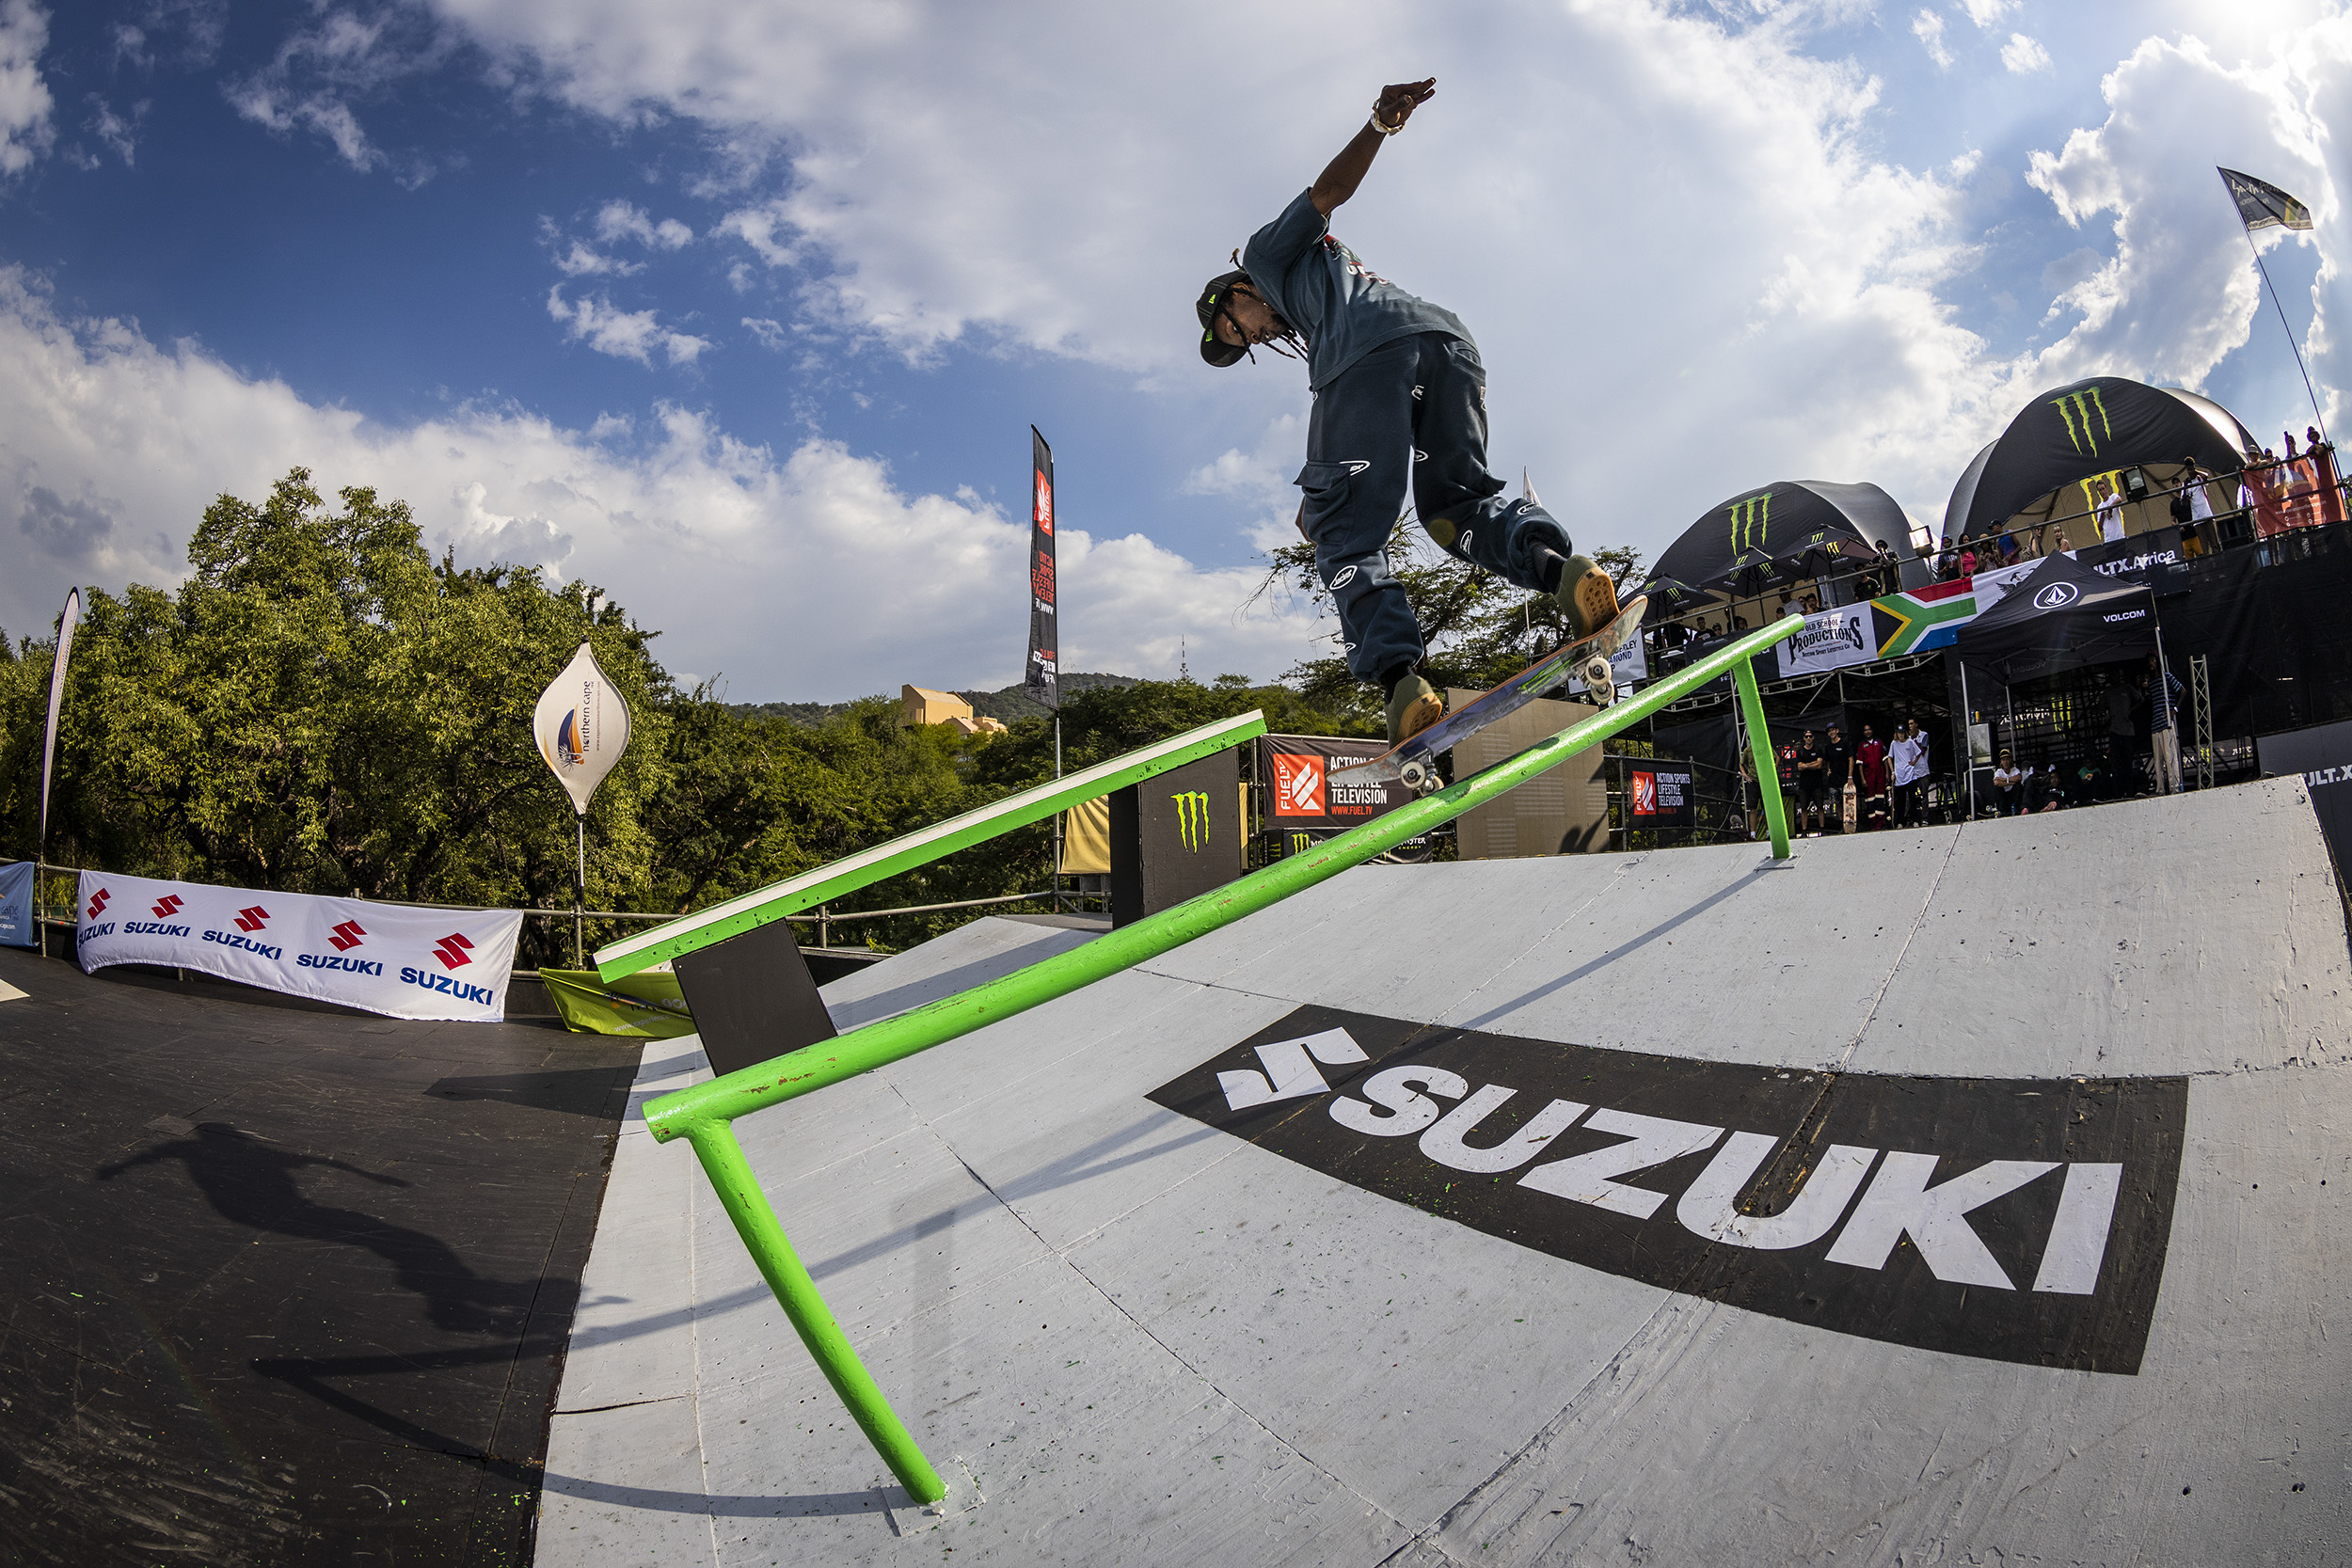 Monster Energy's Khule Ngubane is New African Skateboarding Champion and Wins Best Trick